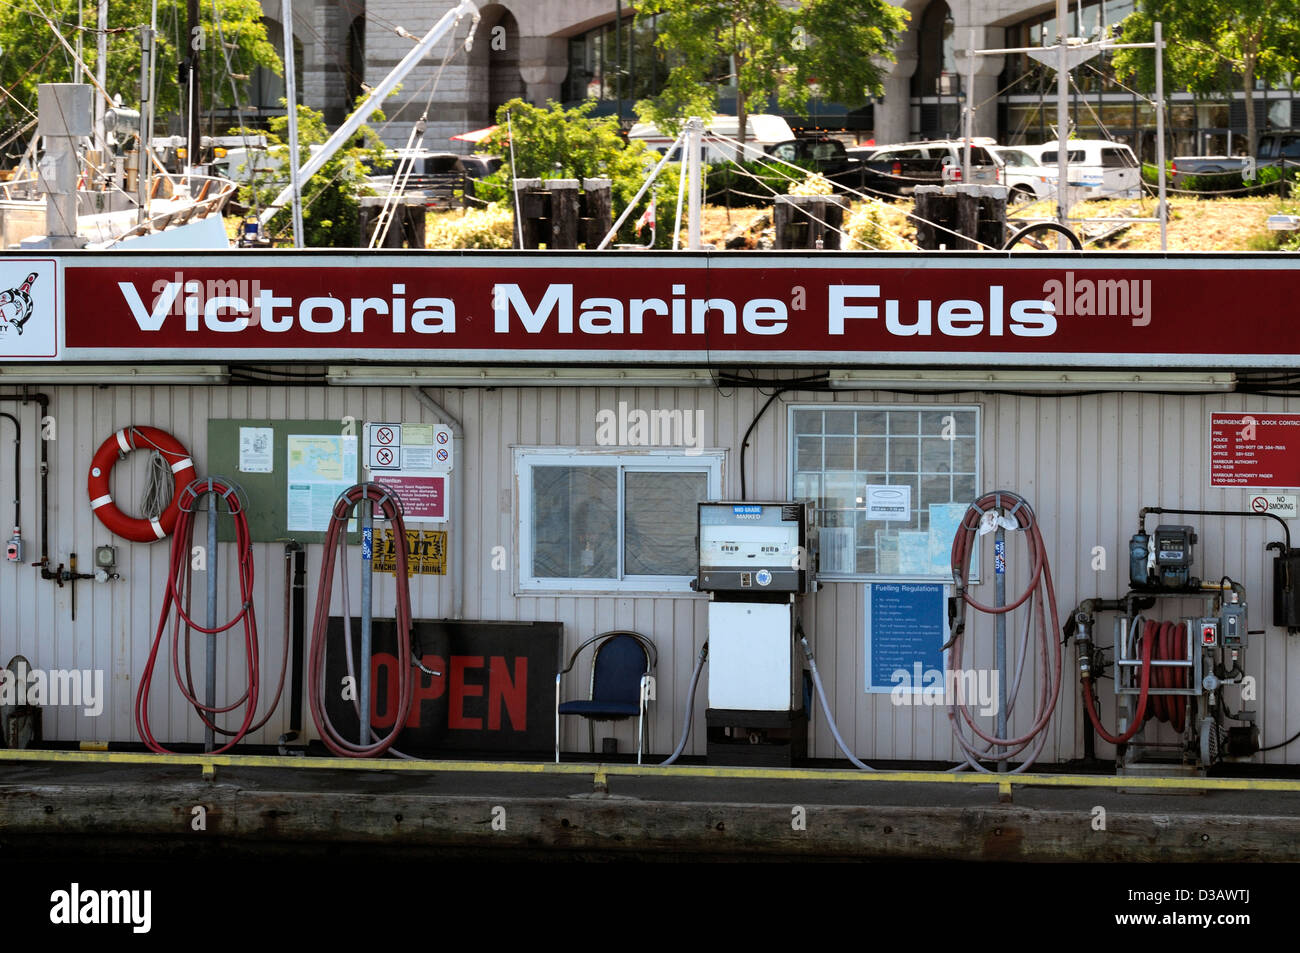 victoria marine fuels floating garage forecourt boat shipping inner harbour vancouver island depot fishermans wharf fuel Stock Photo